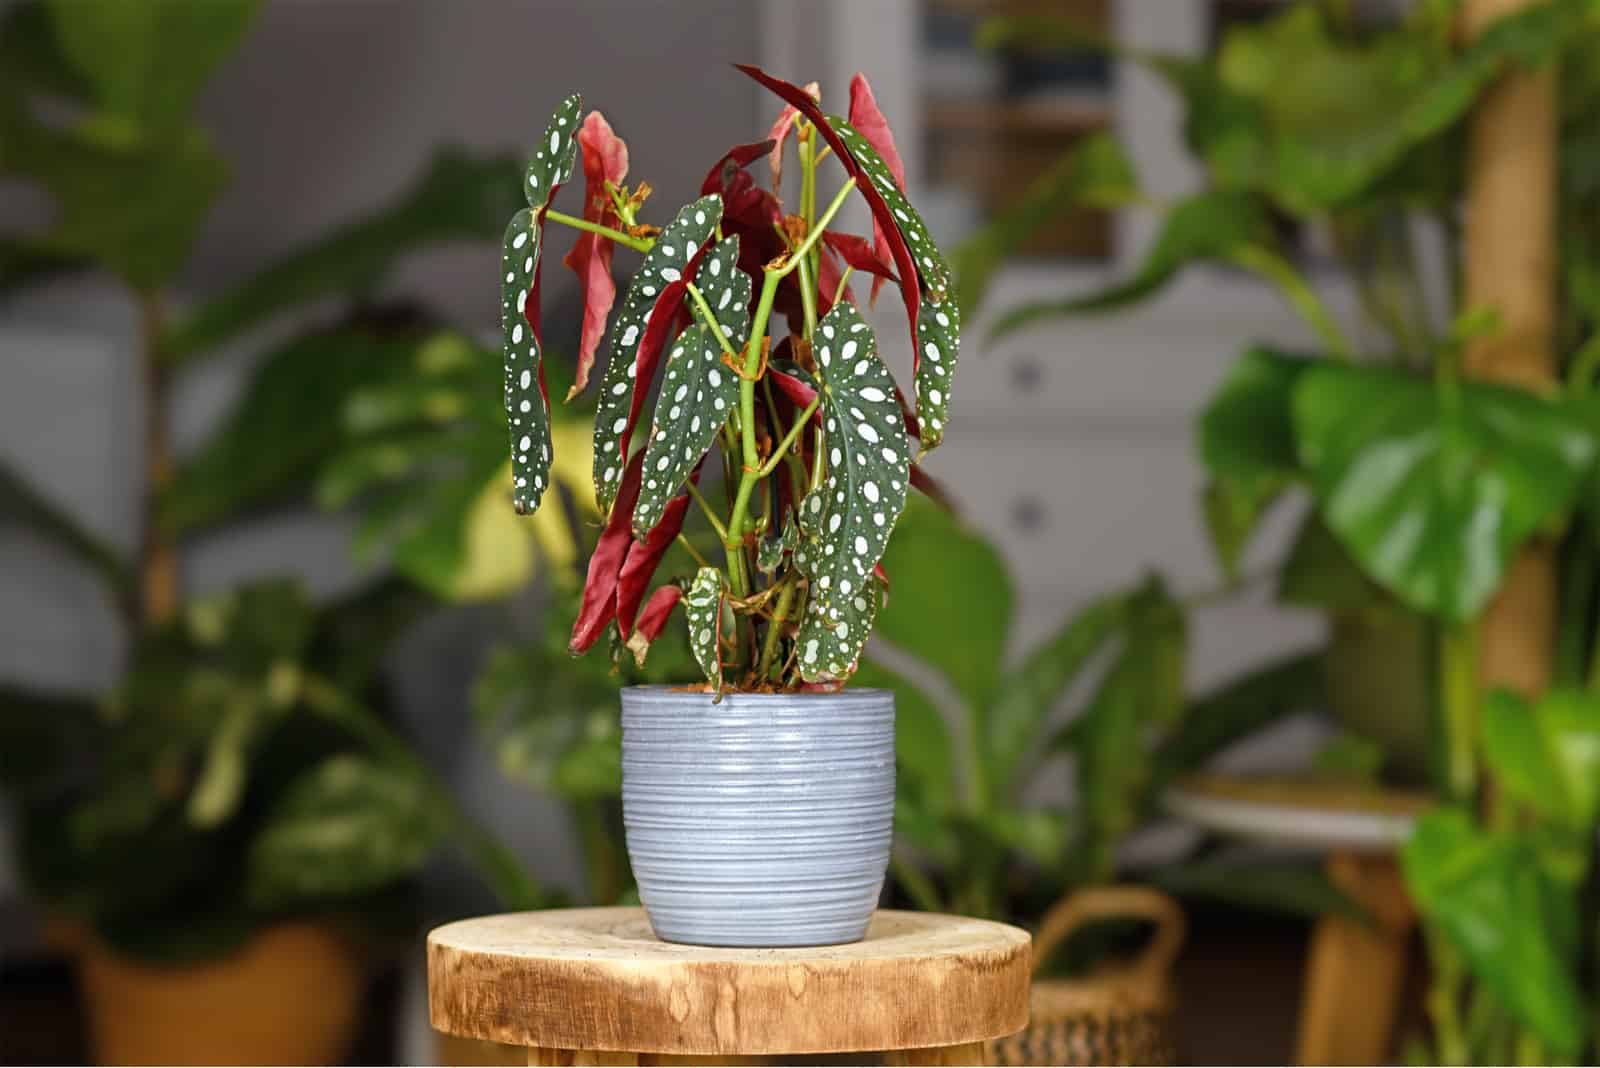 the polka dot plant in pot on wooden plant stand